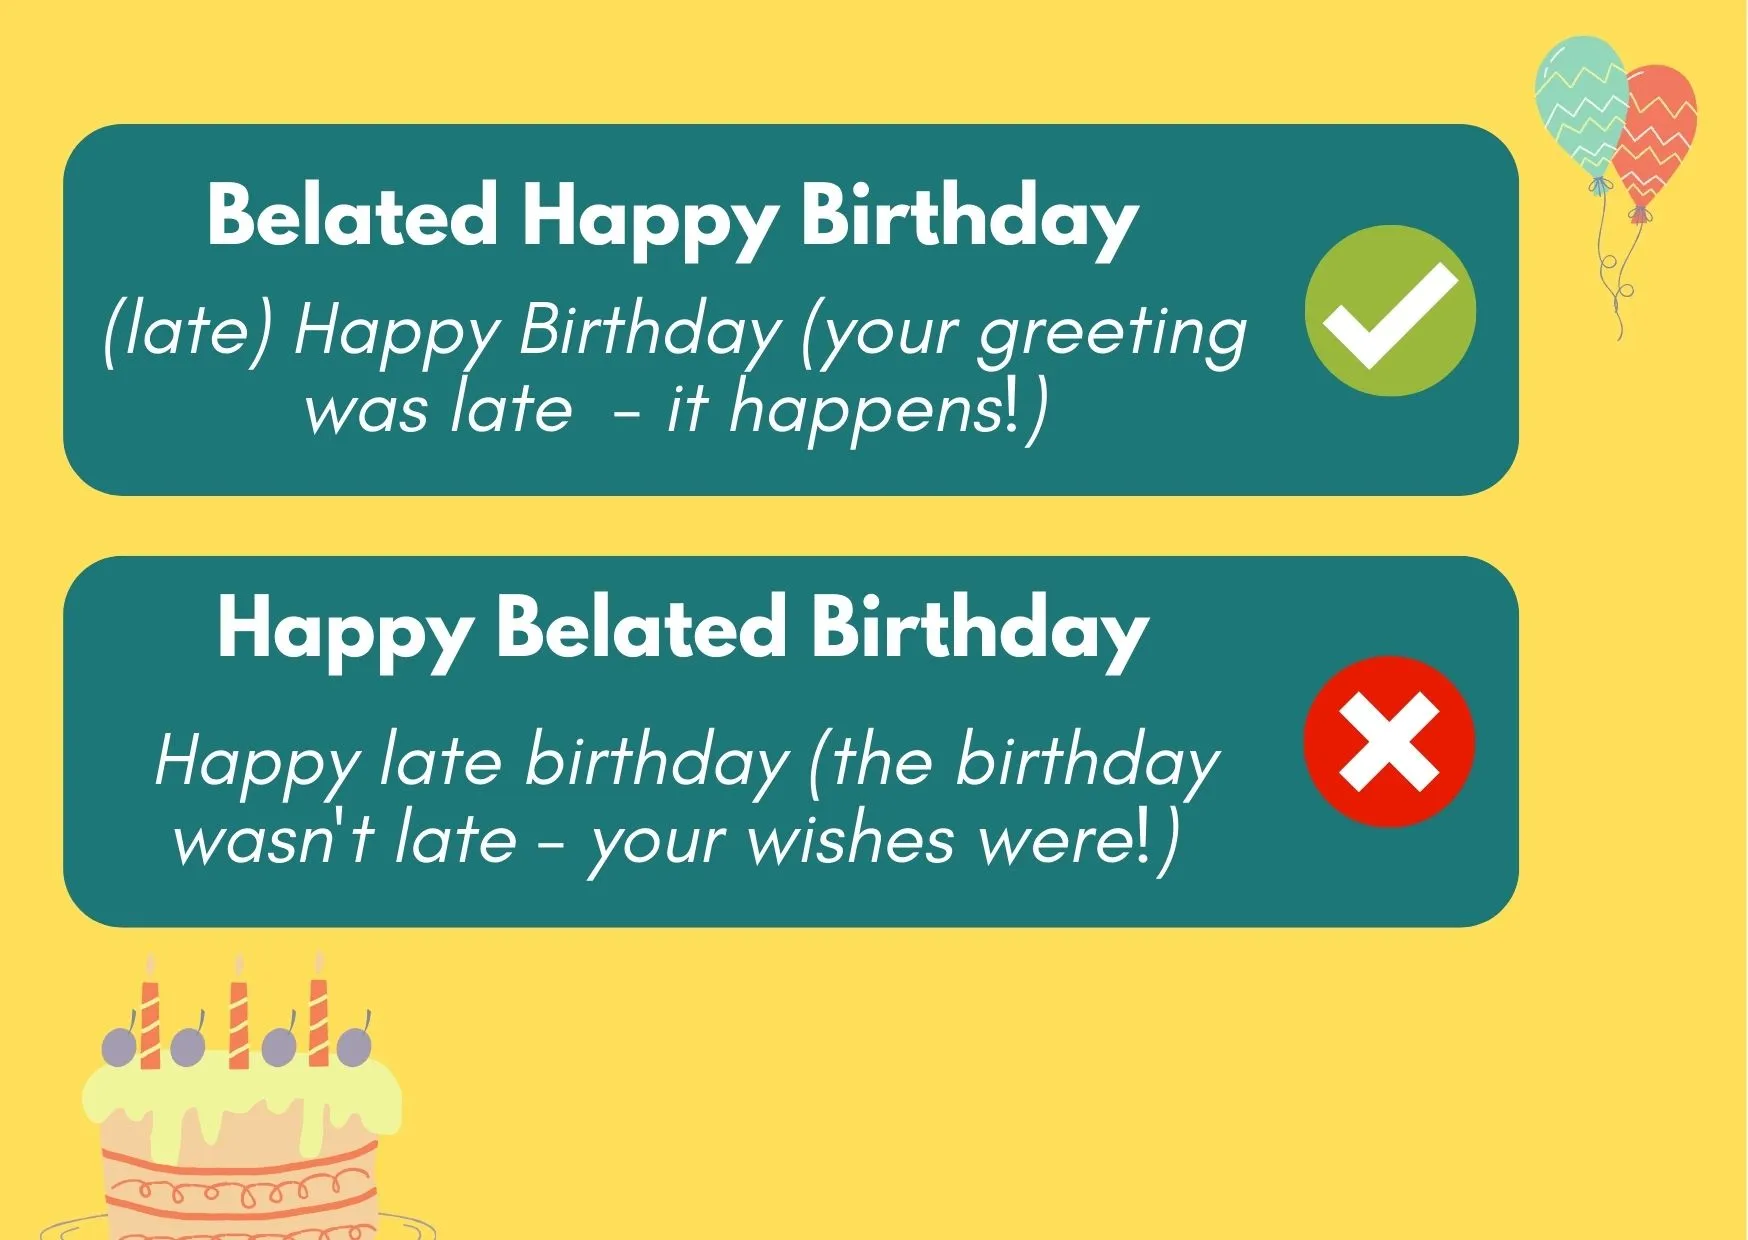 A graphic of a birthday cake and balloons, with an explanation that the correct phrase is "Belated Happy Birthday" since your wishes are the ones that are belated (late) rather than the birthday itself